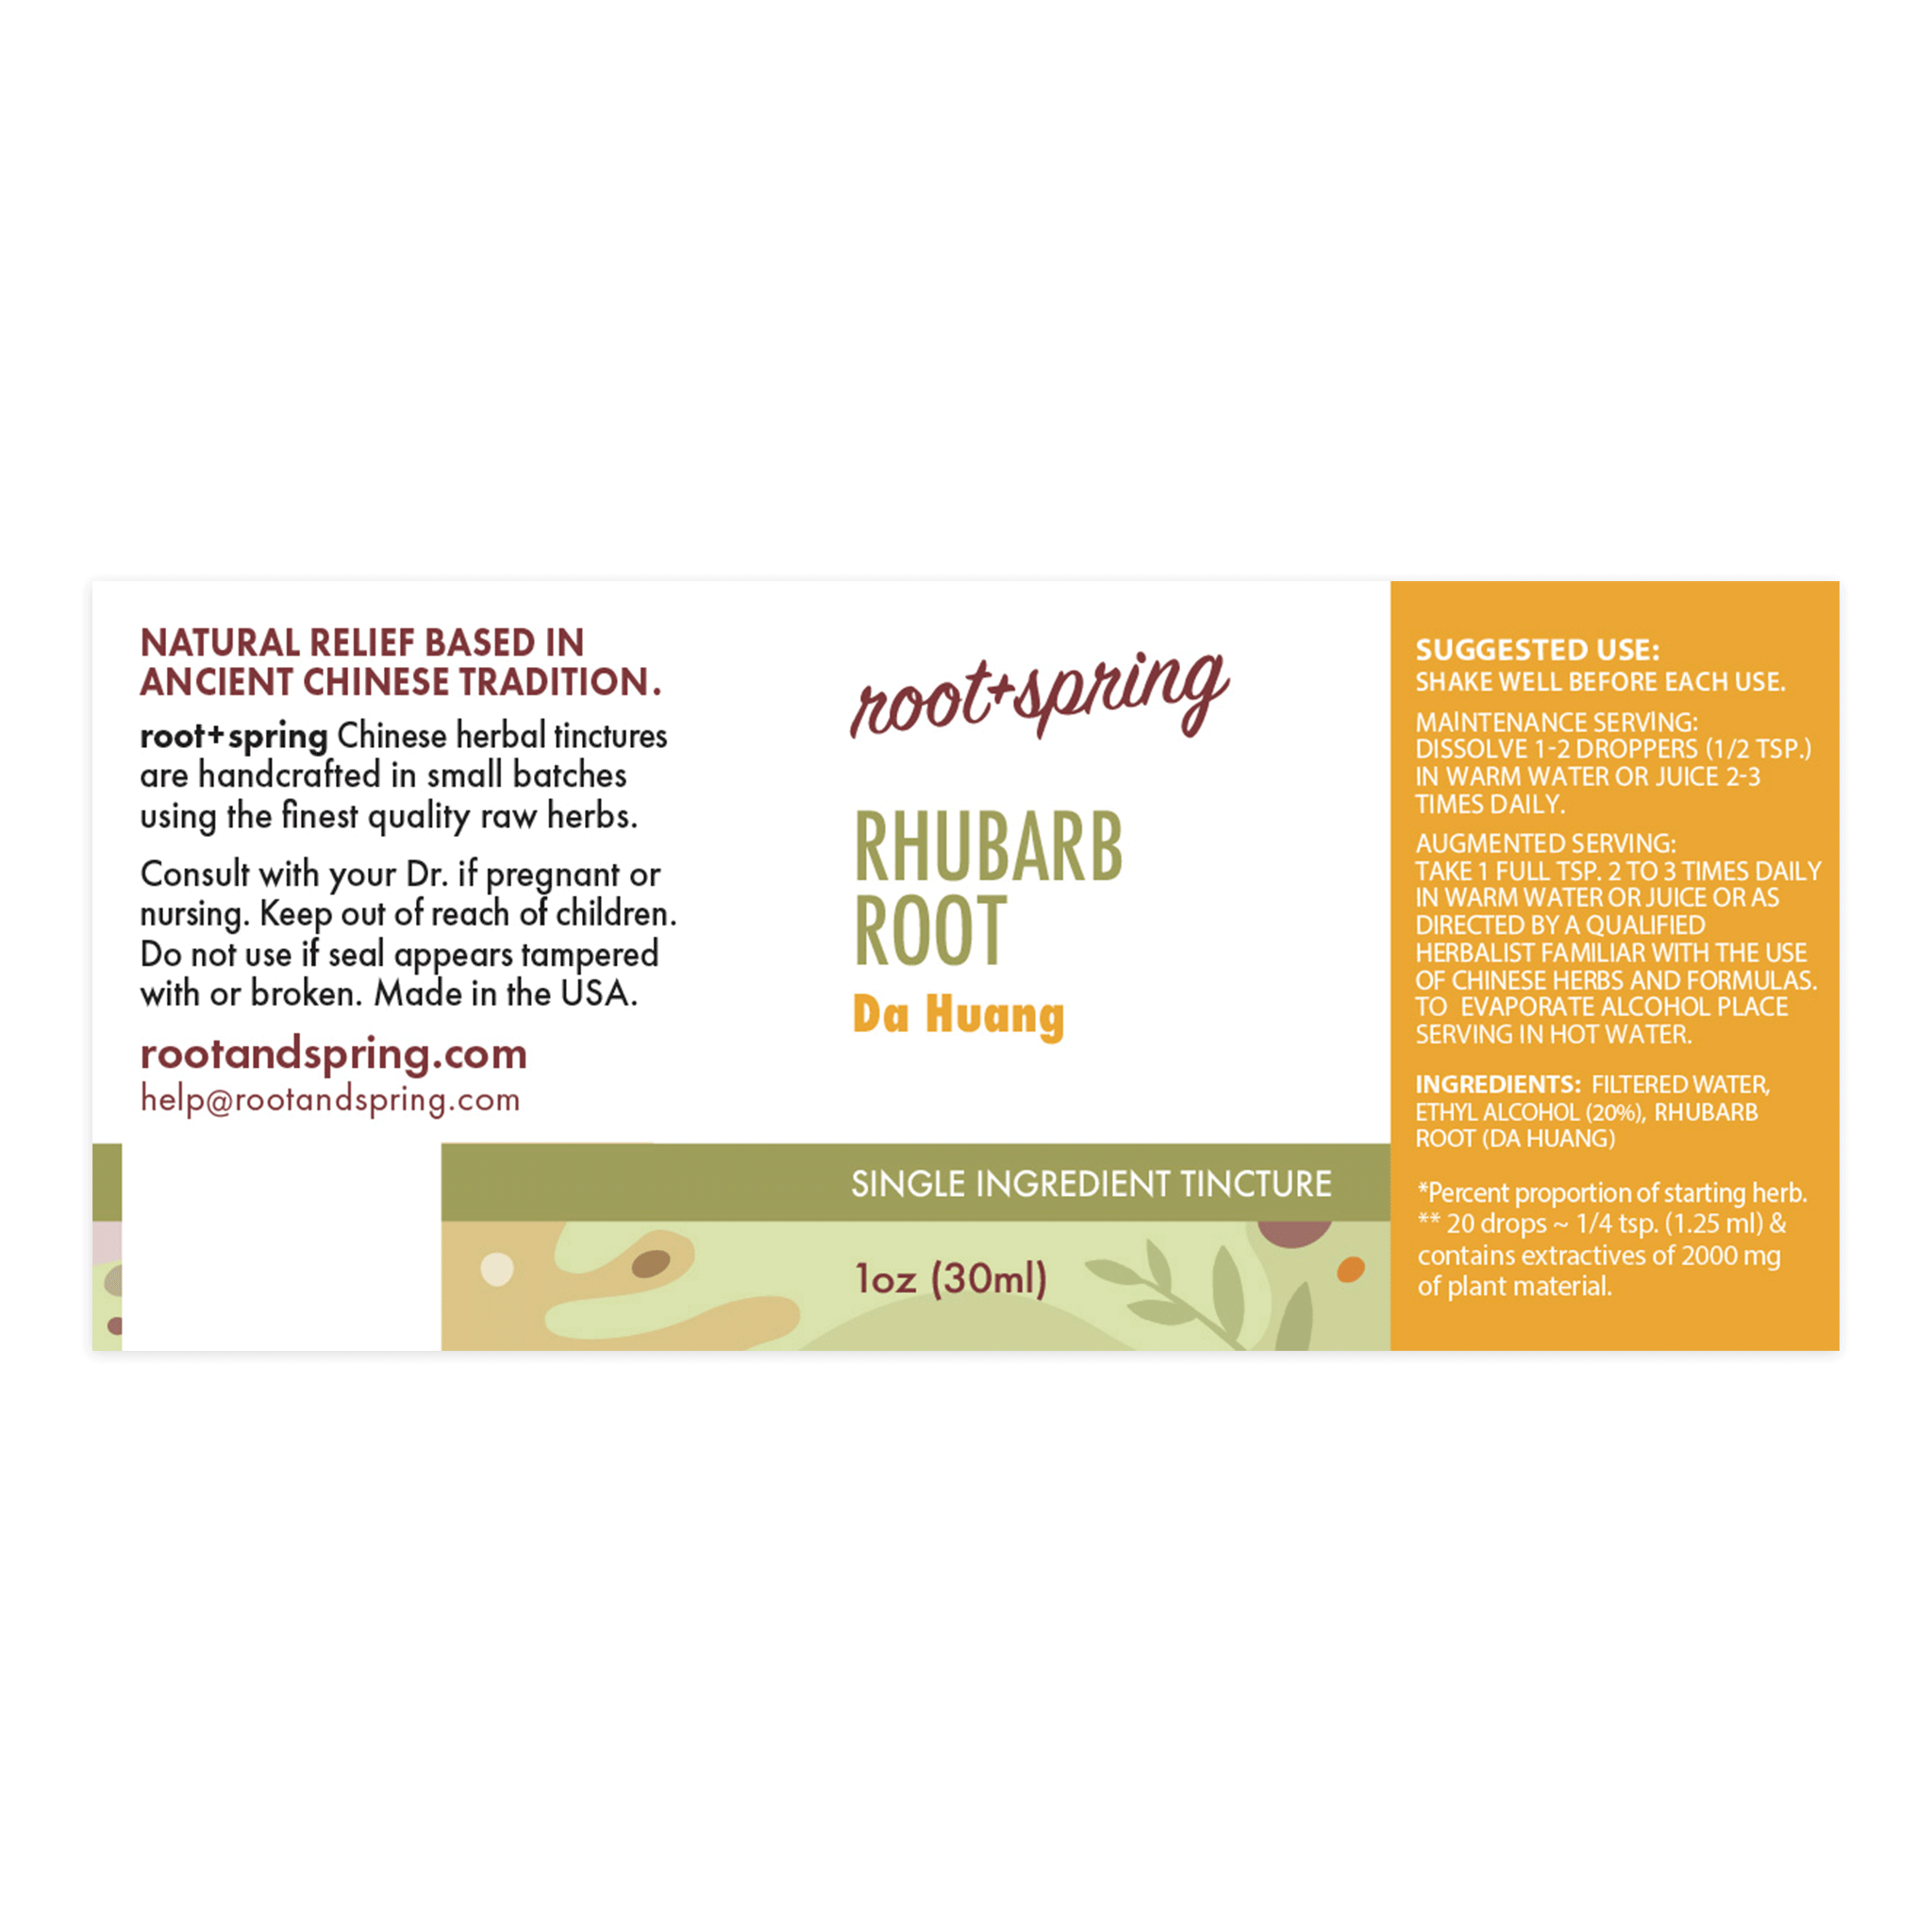 Label for Rhubarb Root, or Da Huang, Herbal Tincture by root + spring